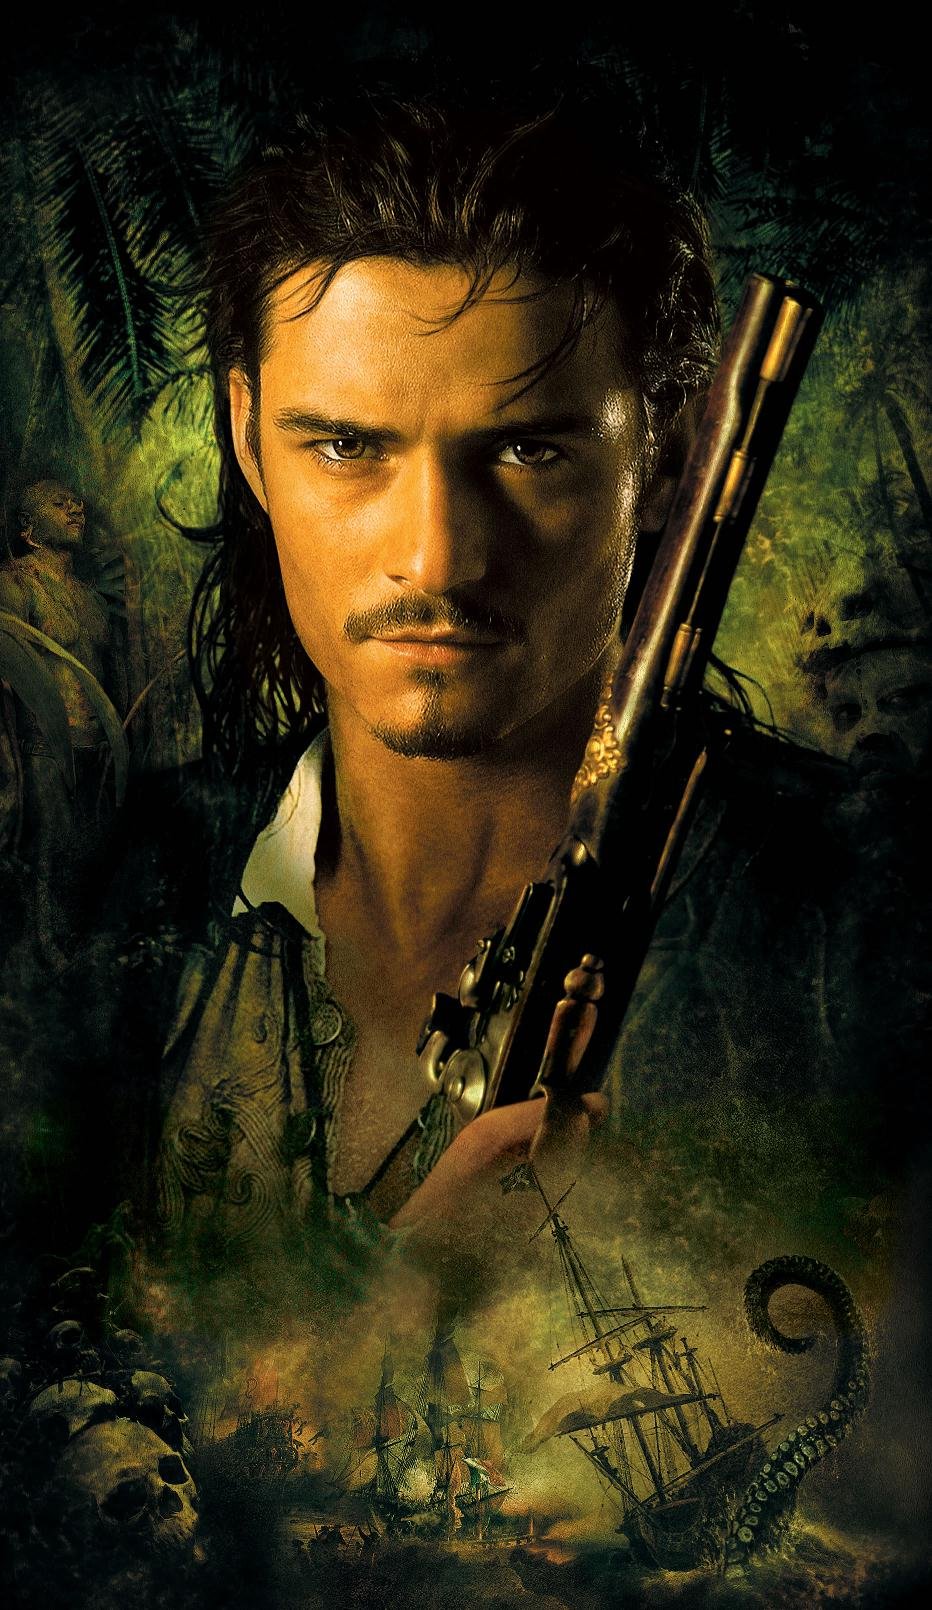 Pirates of the Caribbean: Dead Man's Chest movies